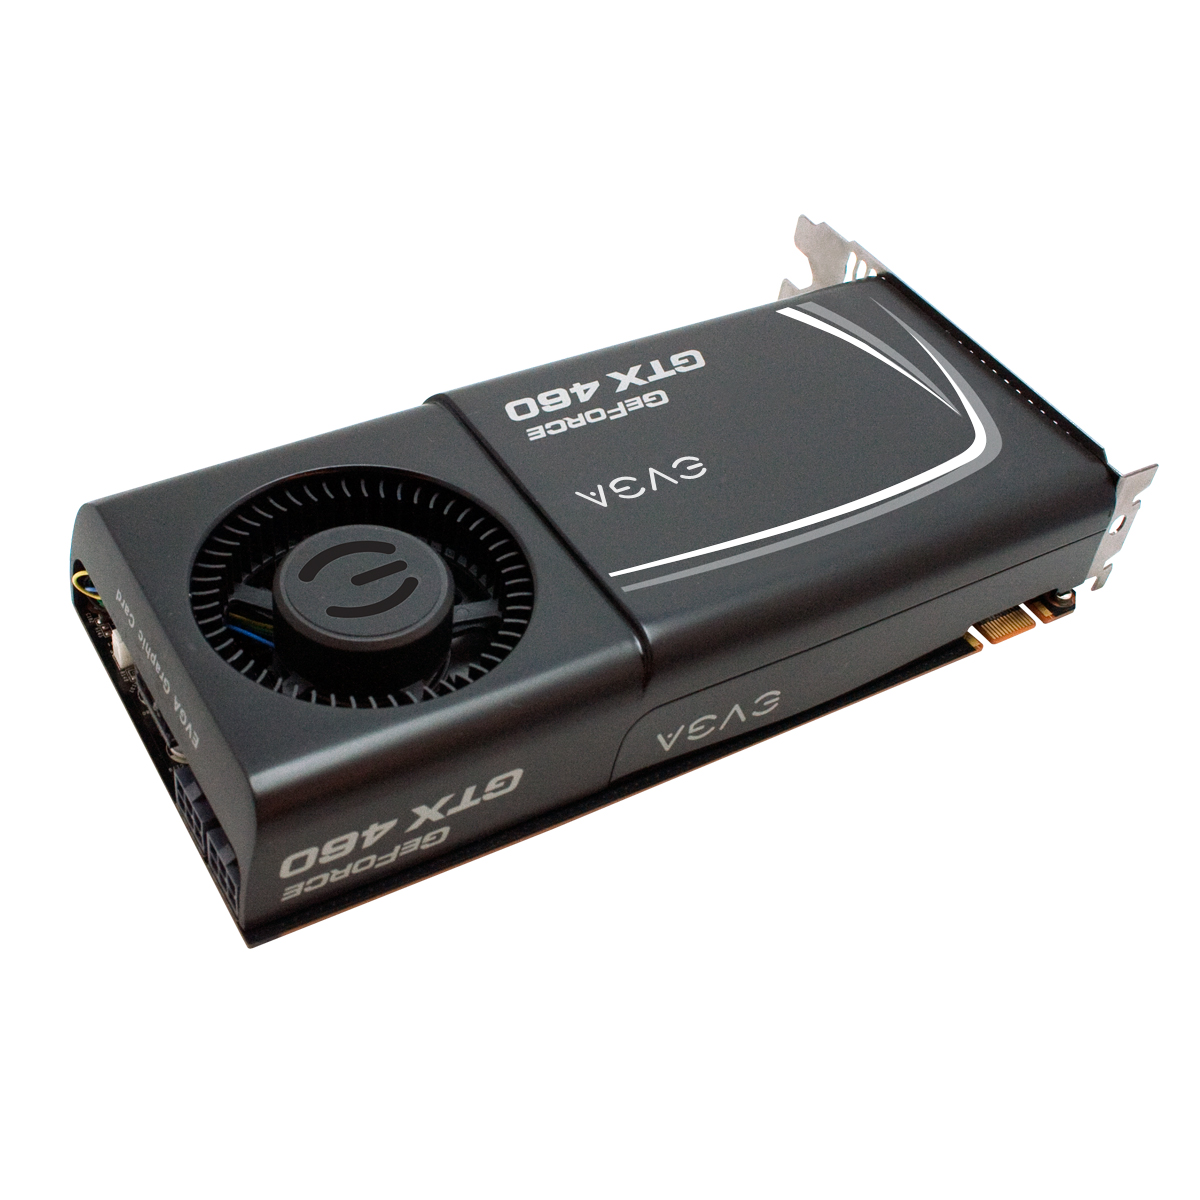 Evga Asia Products Evga Geforce Gtx 460 Superclocked 1024mb Ee External Exhaust 01g P3 1373 Er